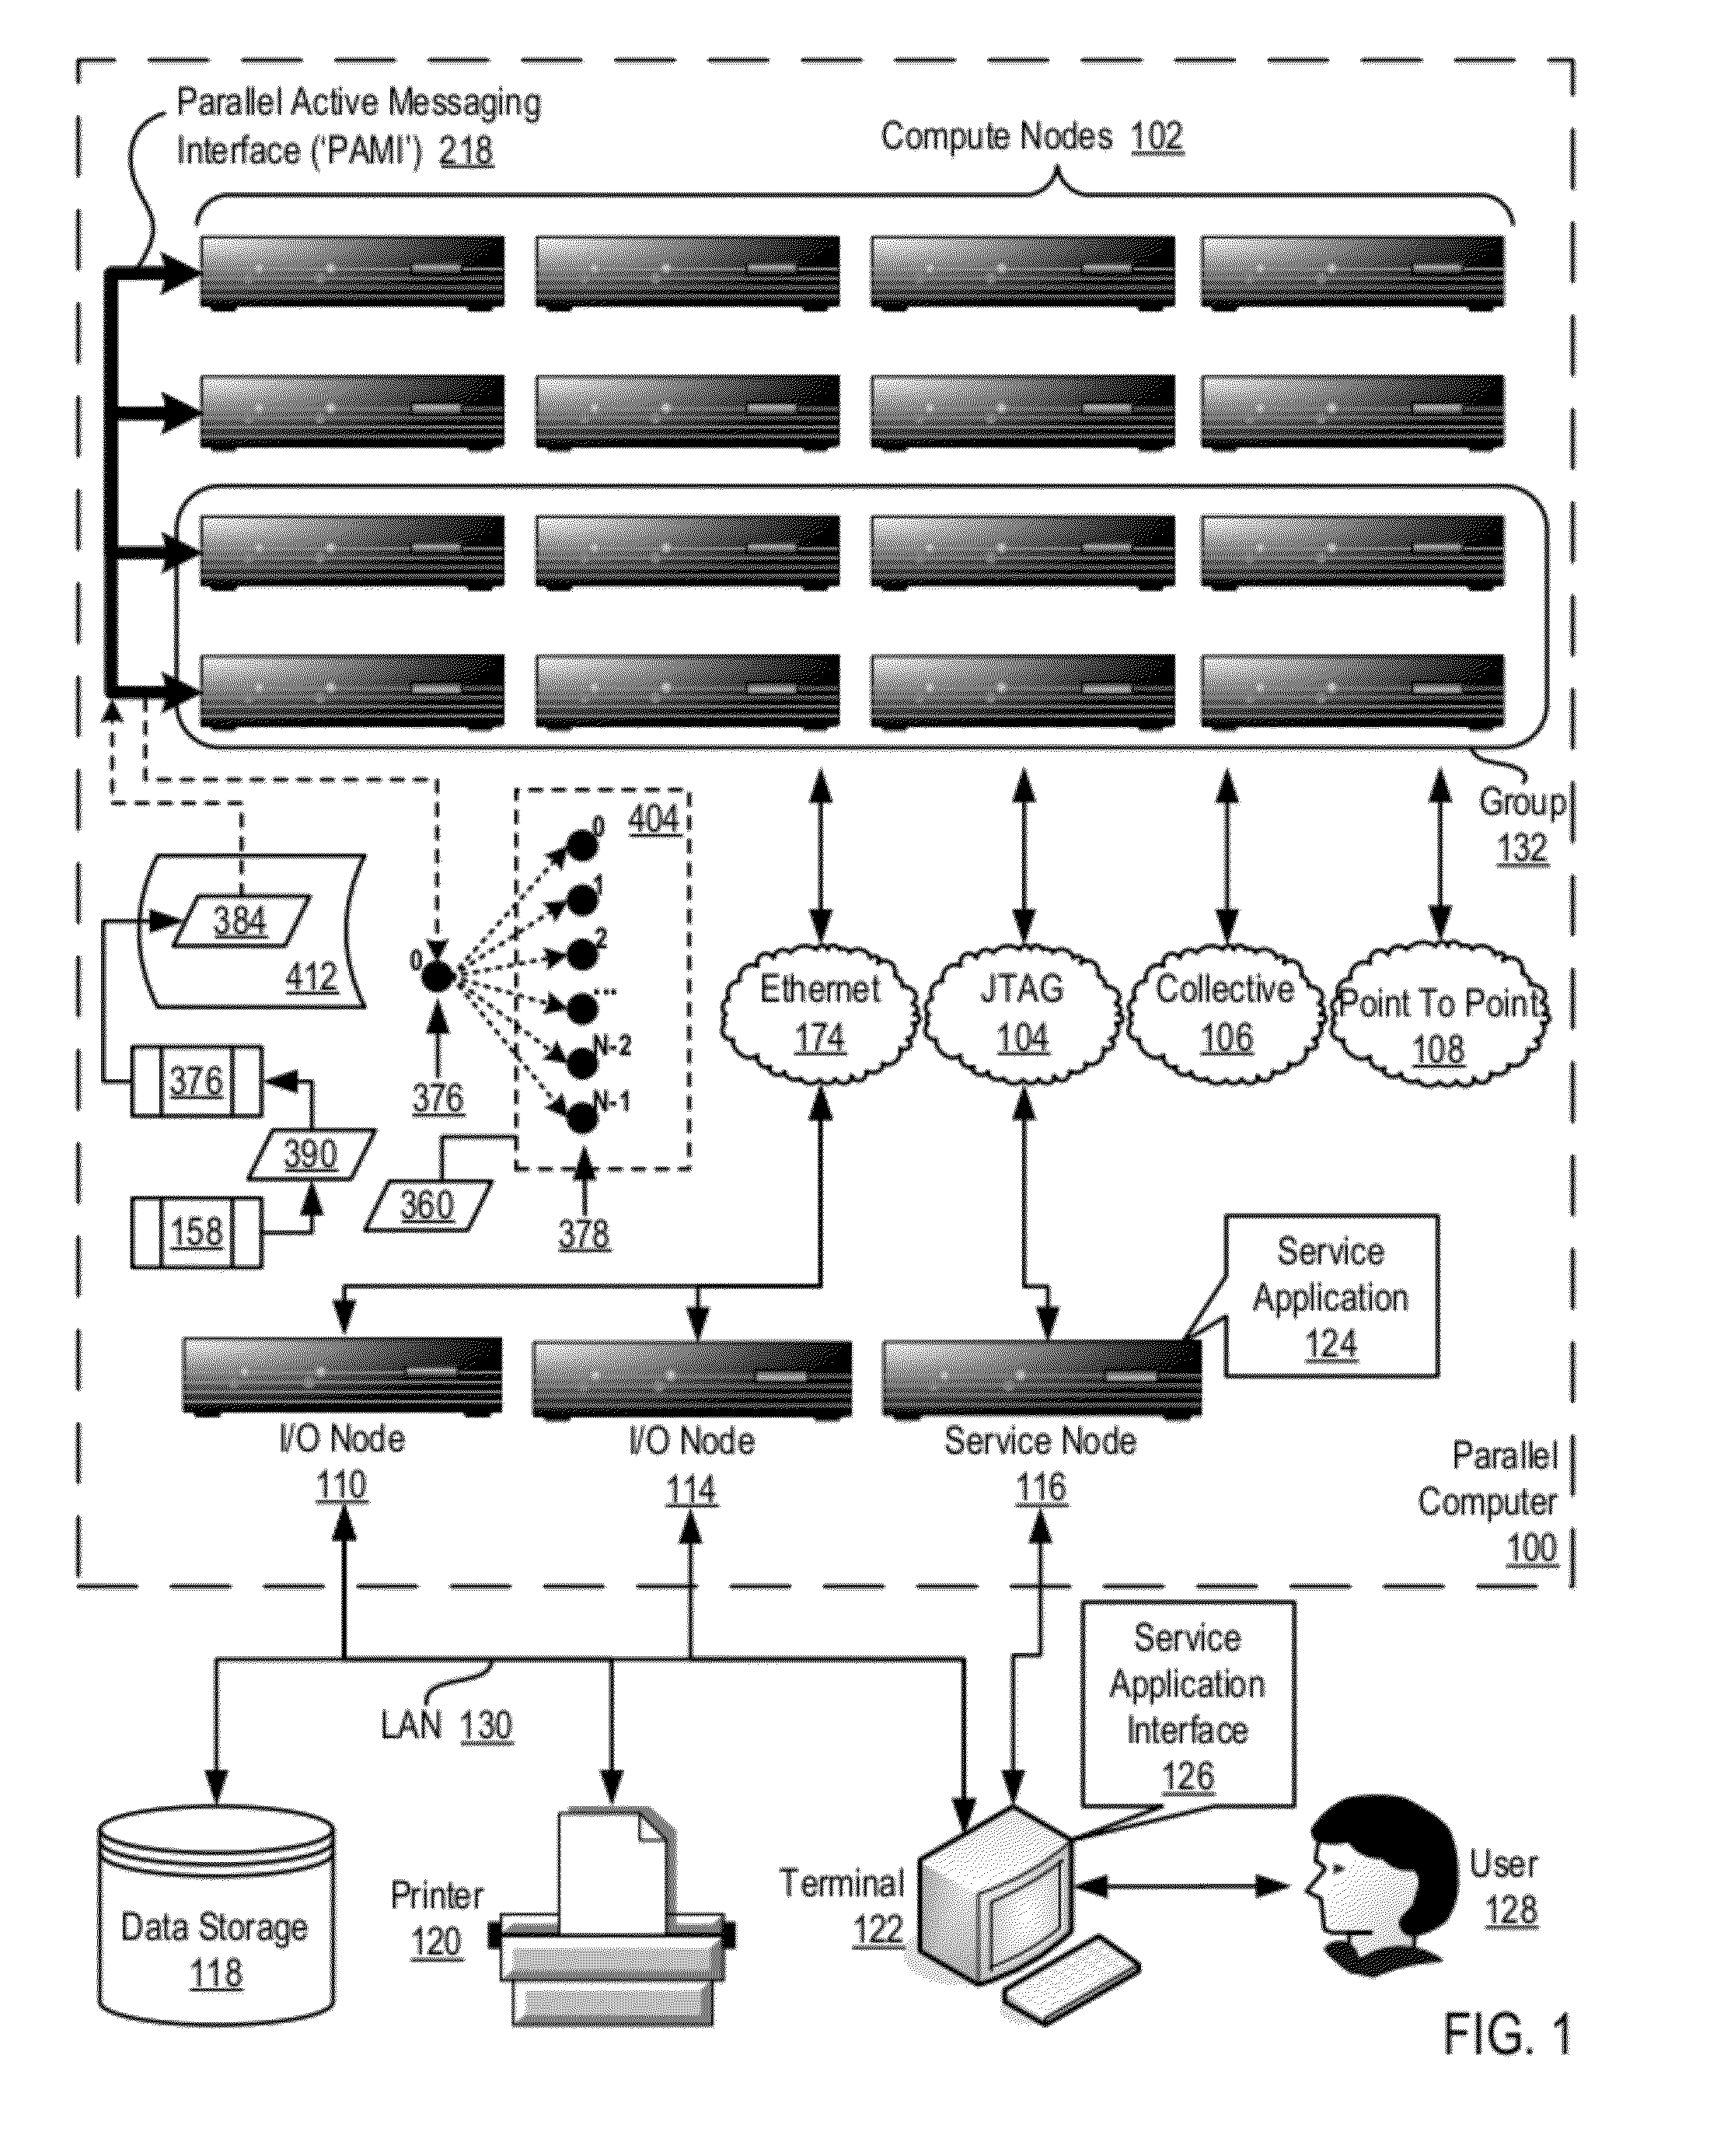 Endpoint-Based Parallel Data Processing With Non-Blocking Collective Instructions In A Parallel Active Messaging Interface Of A Parallel Computer